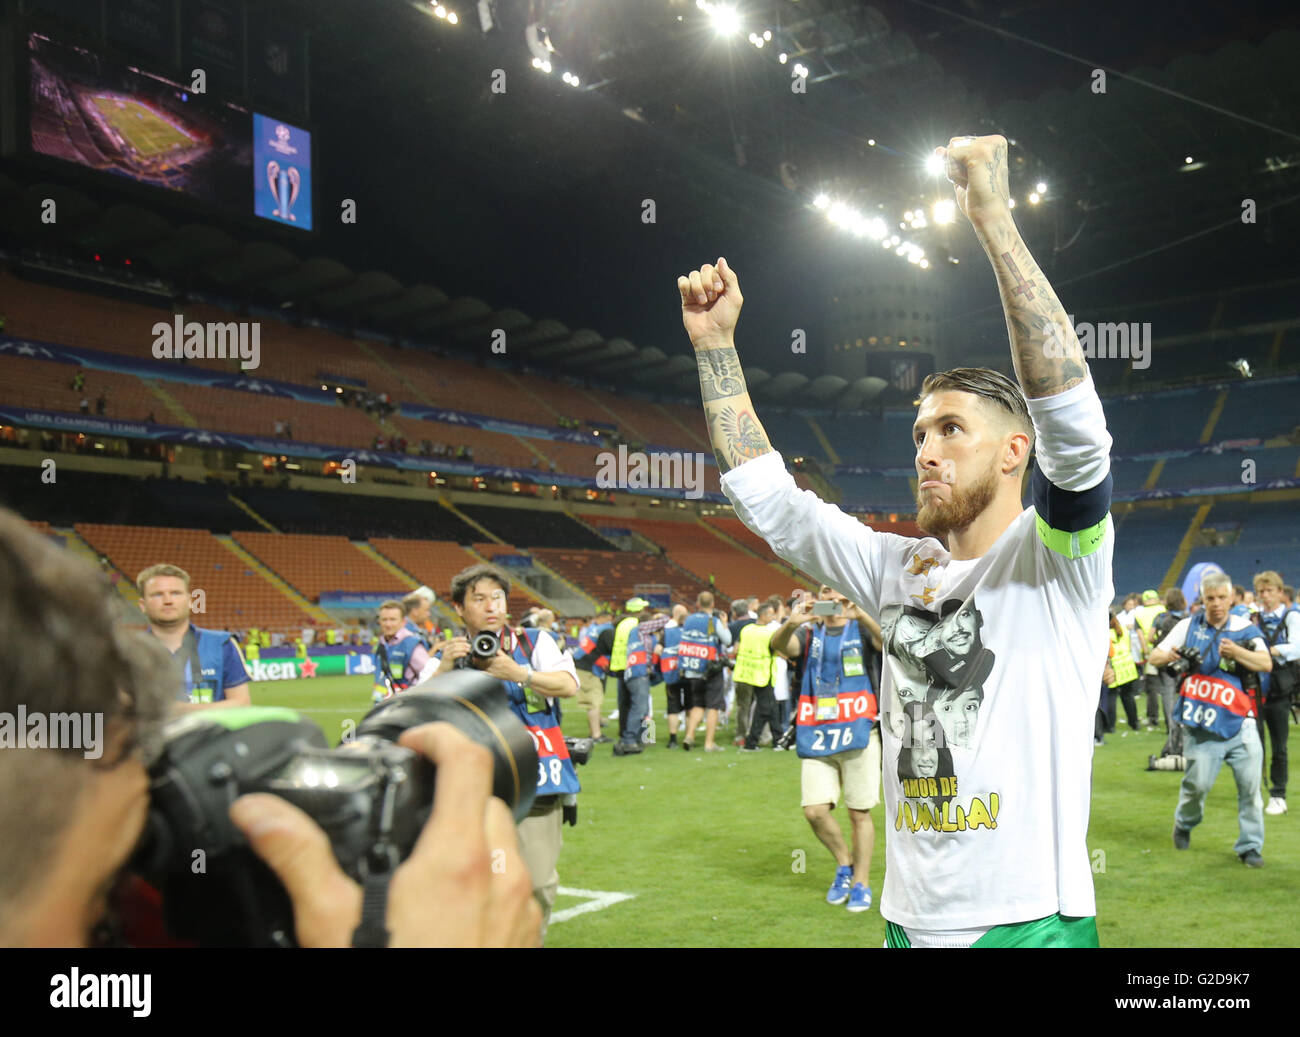 Milan, Italy. 28th May, 2016. Real's captain Sergio Ramos celebrates after winning the UEFA Champions League Final between Real Madrid and Atletico Madrid at the Stadio Giuseppe Meazza in Milan, Italy, 28 May 2016. Photo: Christian Charisius/dpa/Alamy Live News Stock Photo